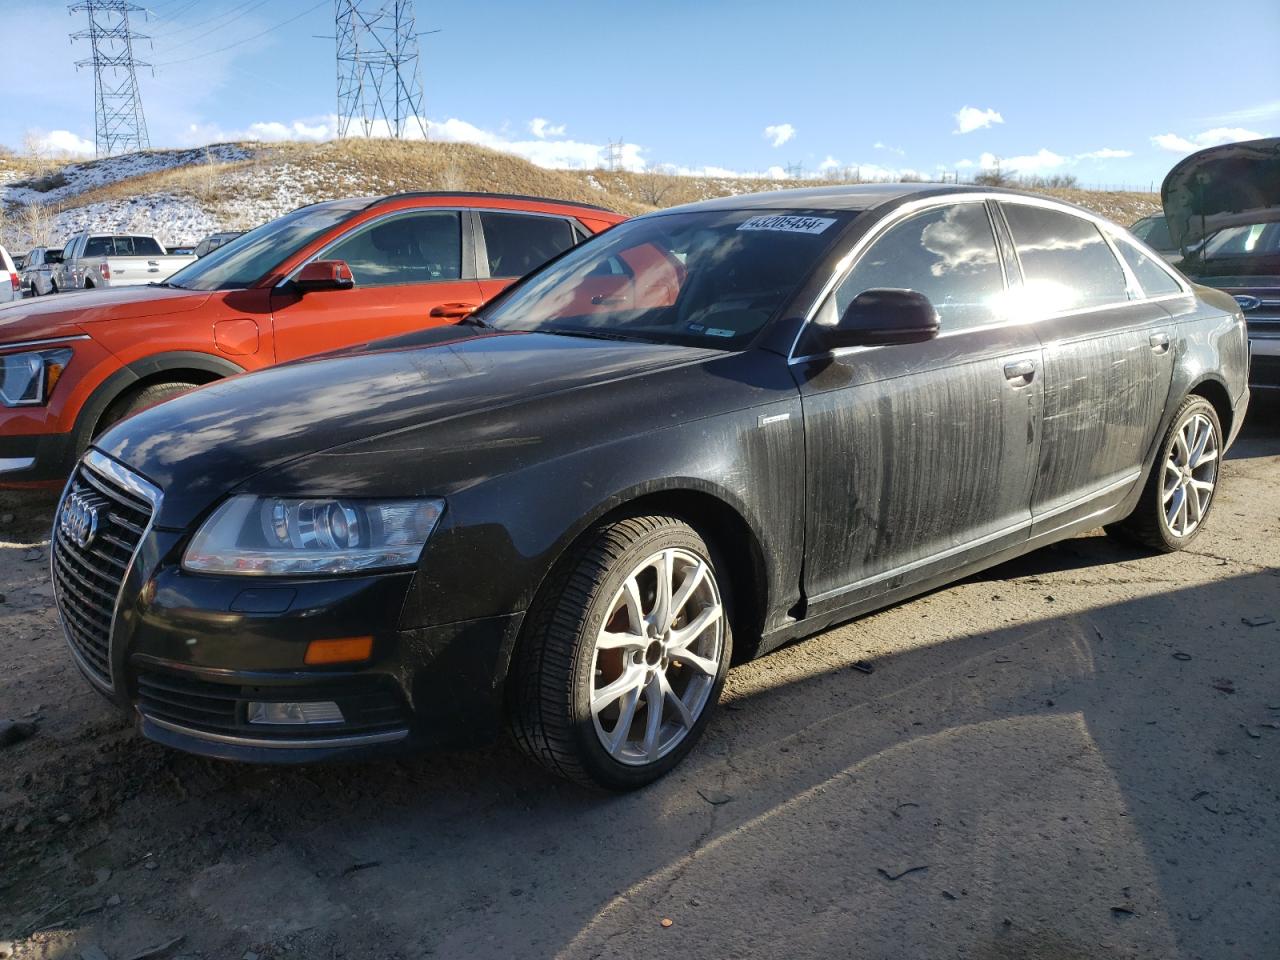 vin: WAUFGAFB7AN072612 WAUFGAFB7AN072612 2010 audi a6 3000 for Sale in 80125 9741, Co - Denver South, Littleton, USA